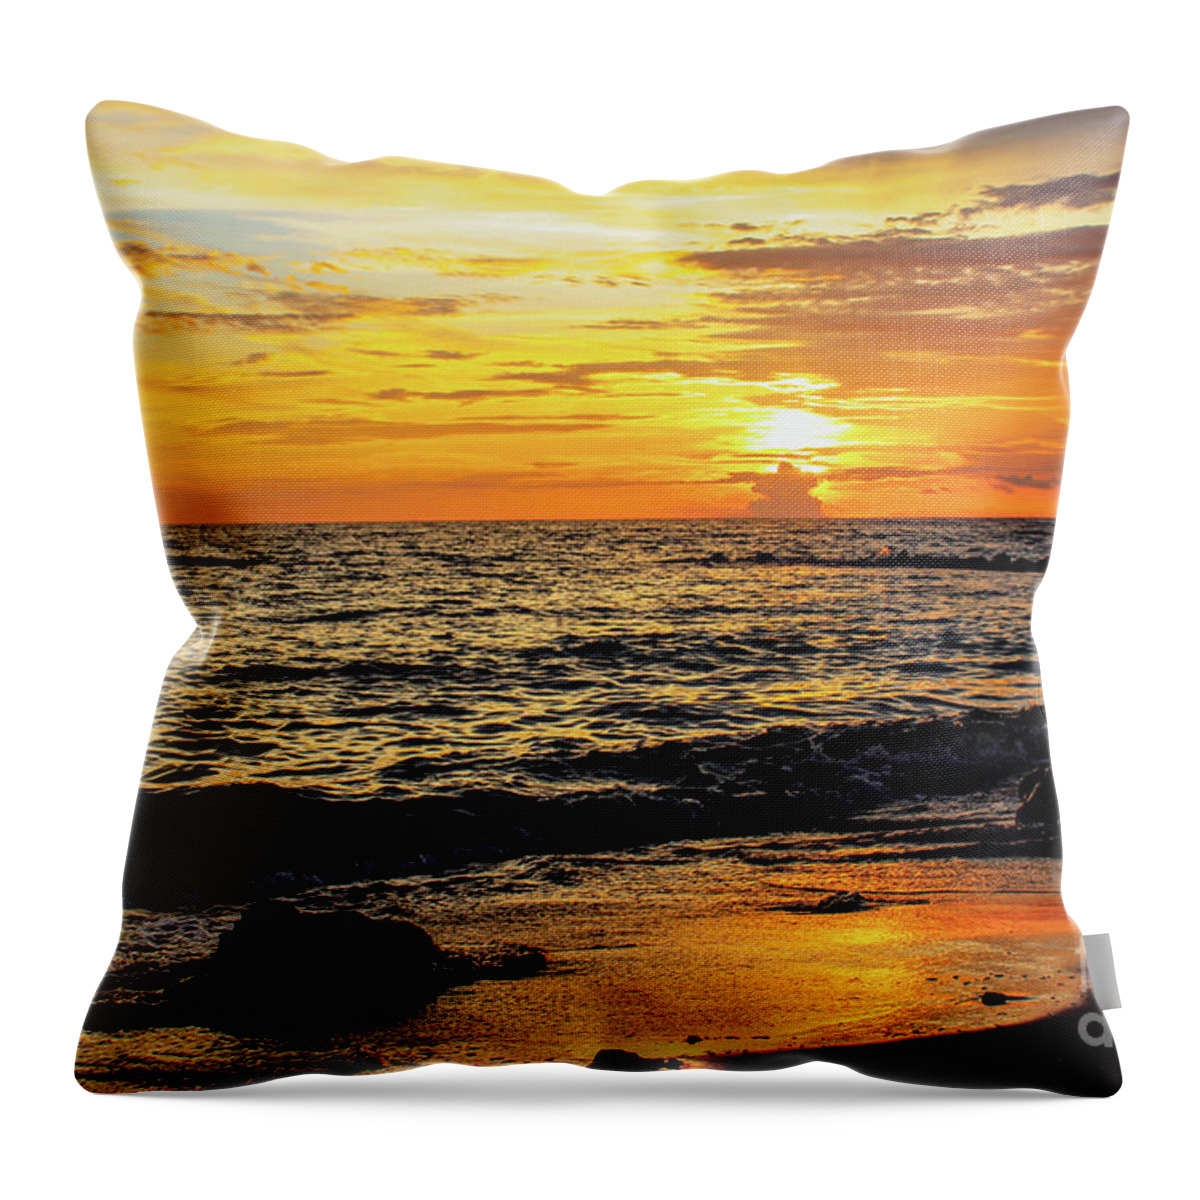 Sunset Throw Pillow featuring the photograph Golden Hues at Sunset by Joanne Carey